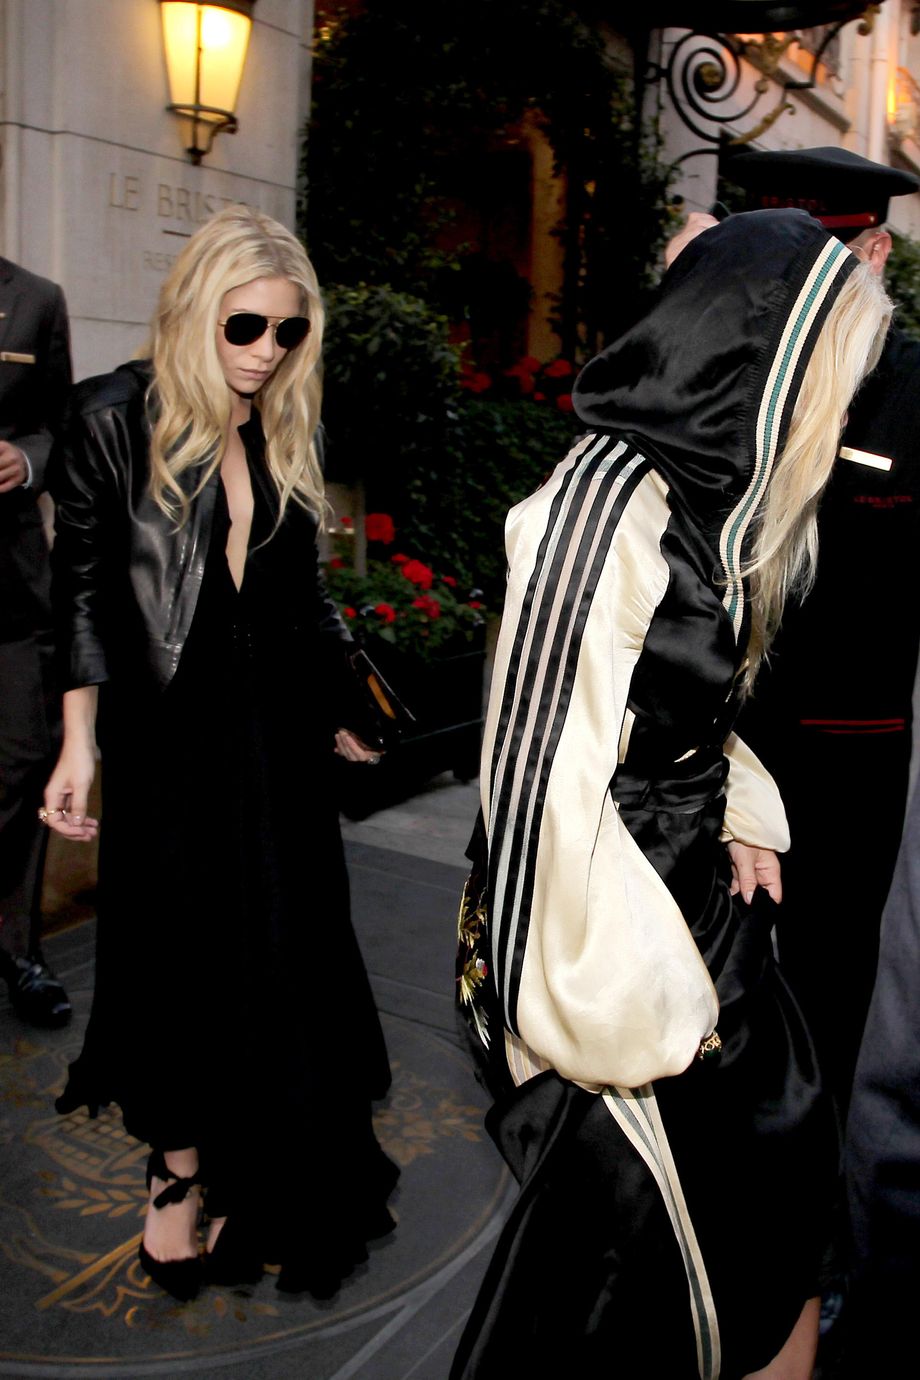 The Row's $39,000 Bag Sells Out In Stores!  Mary kate olsen style, Style,  Olsen twins